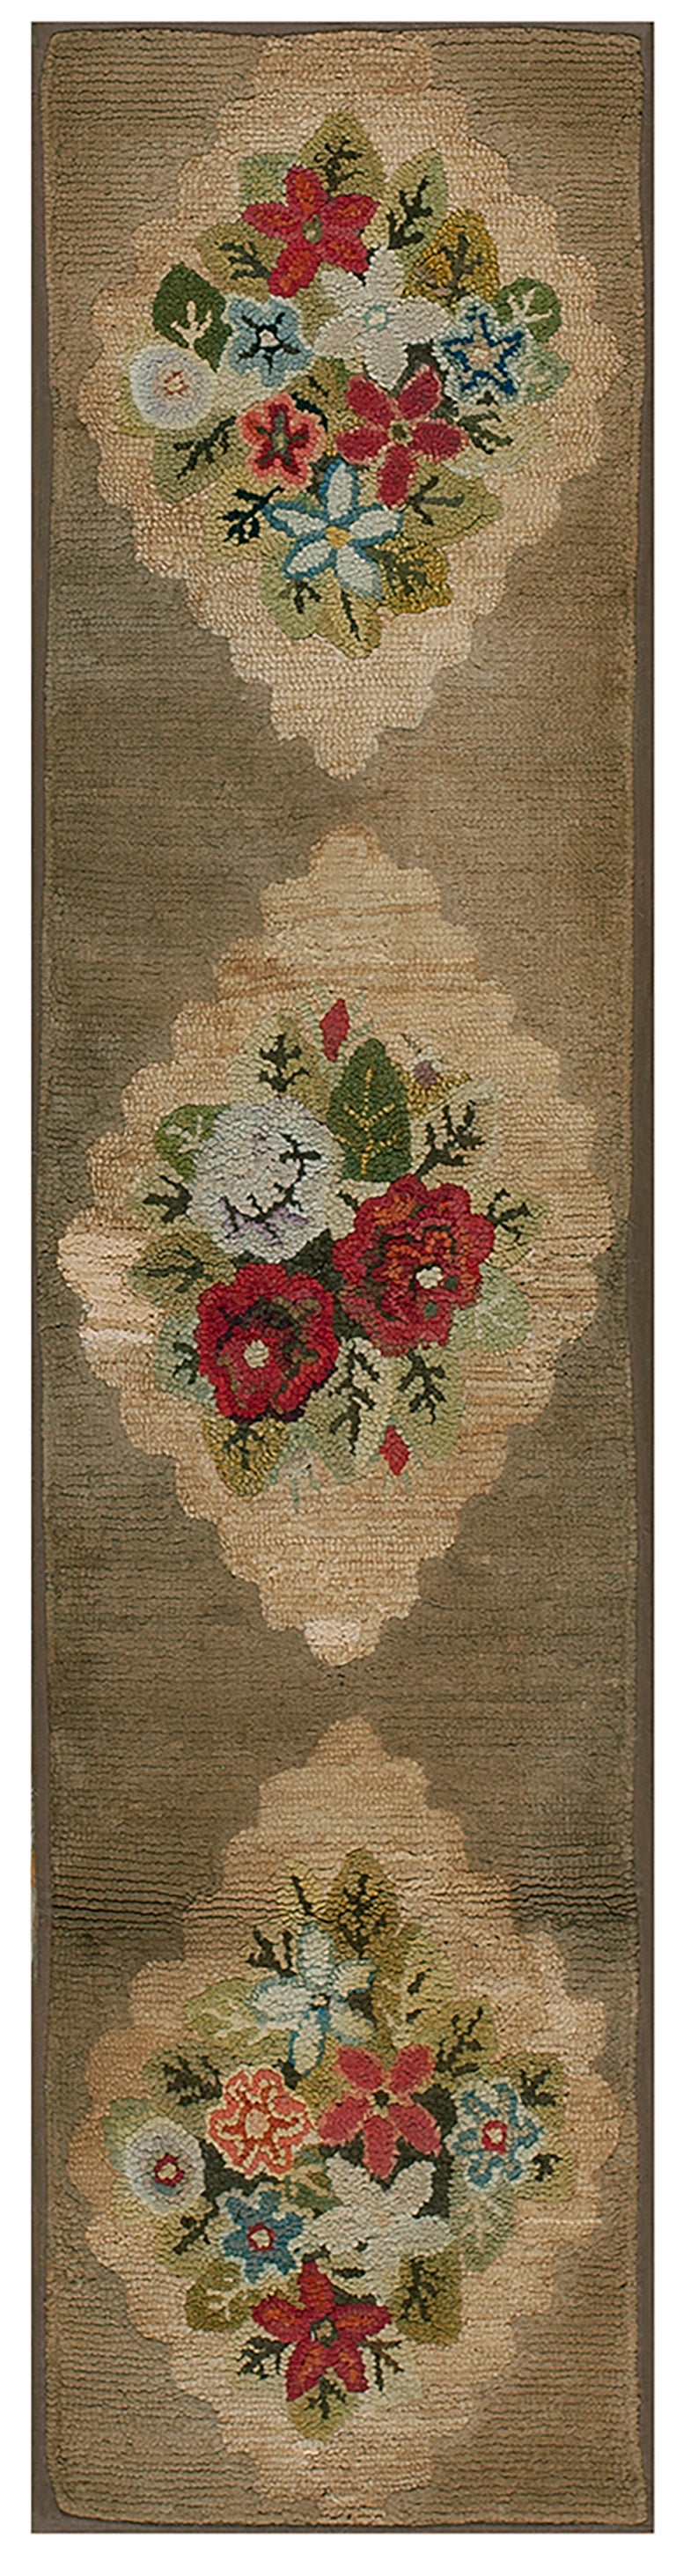 1930s American Hooked Rug ( 1'6" x 5'6" - 46 x 168 ) For Sale